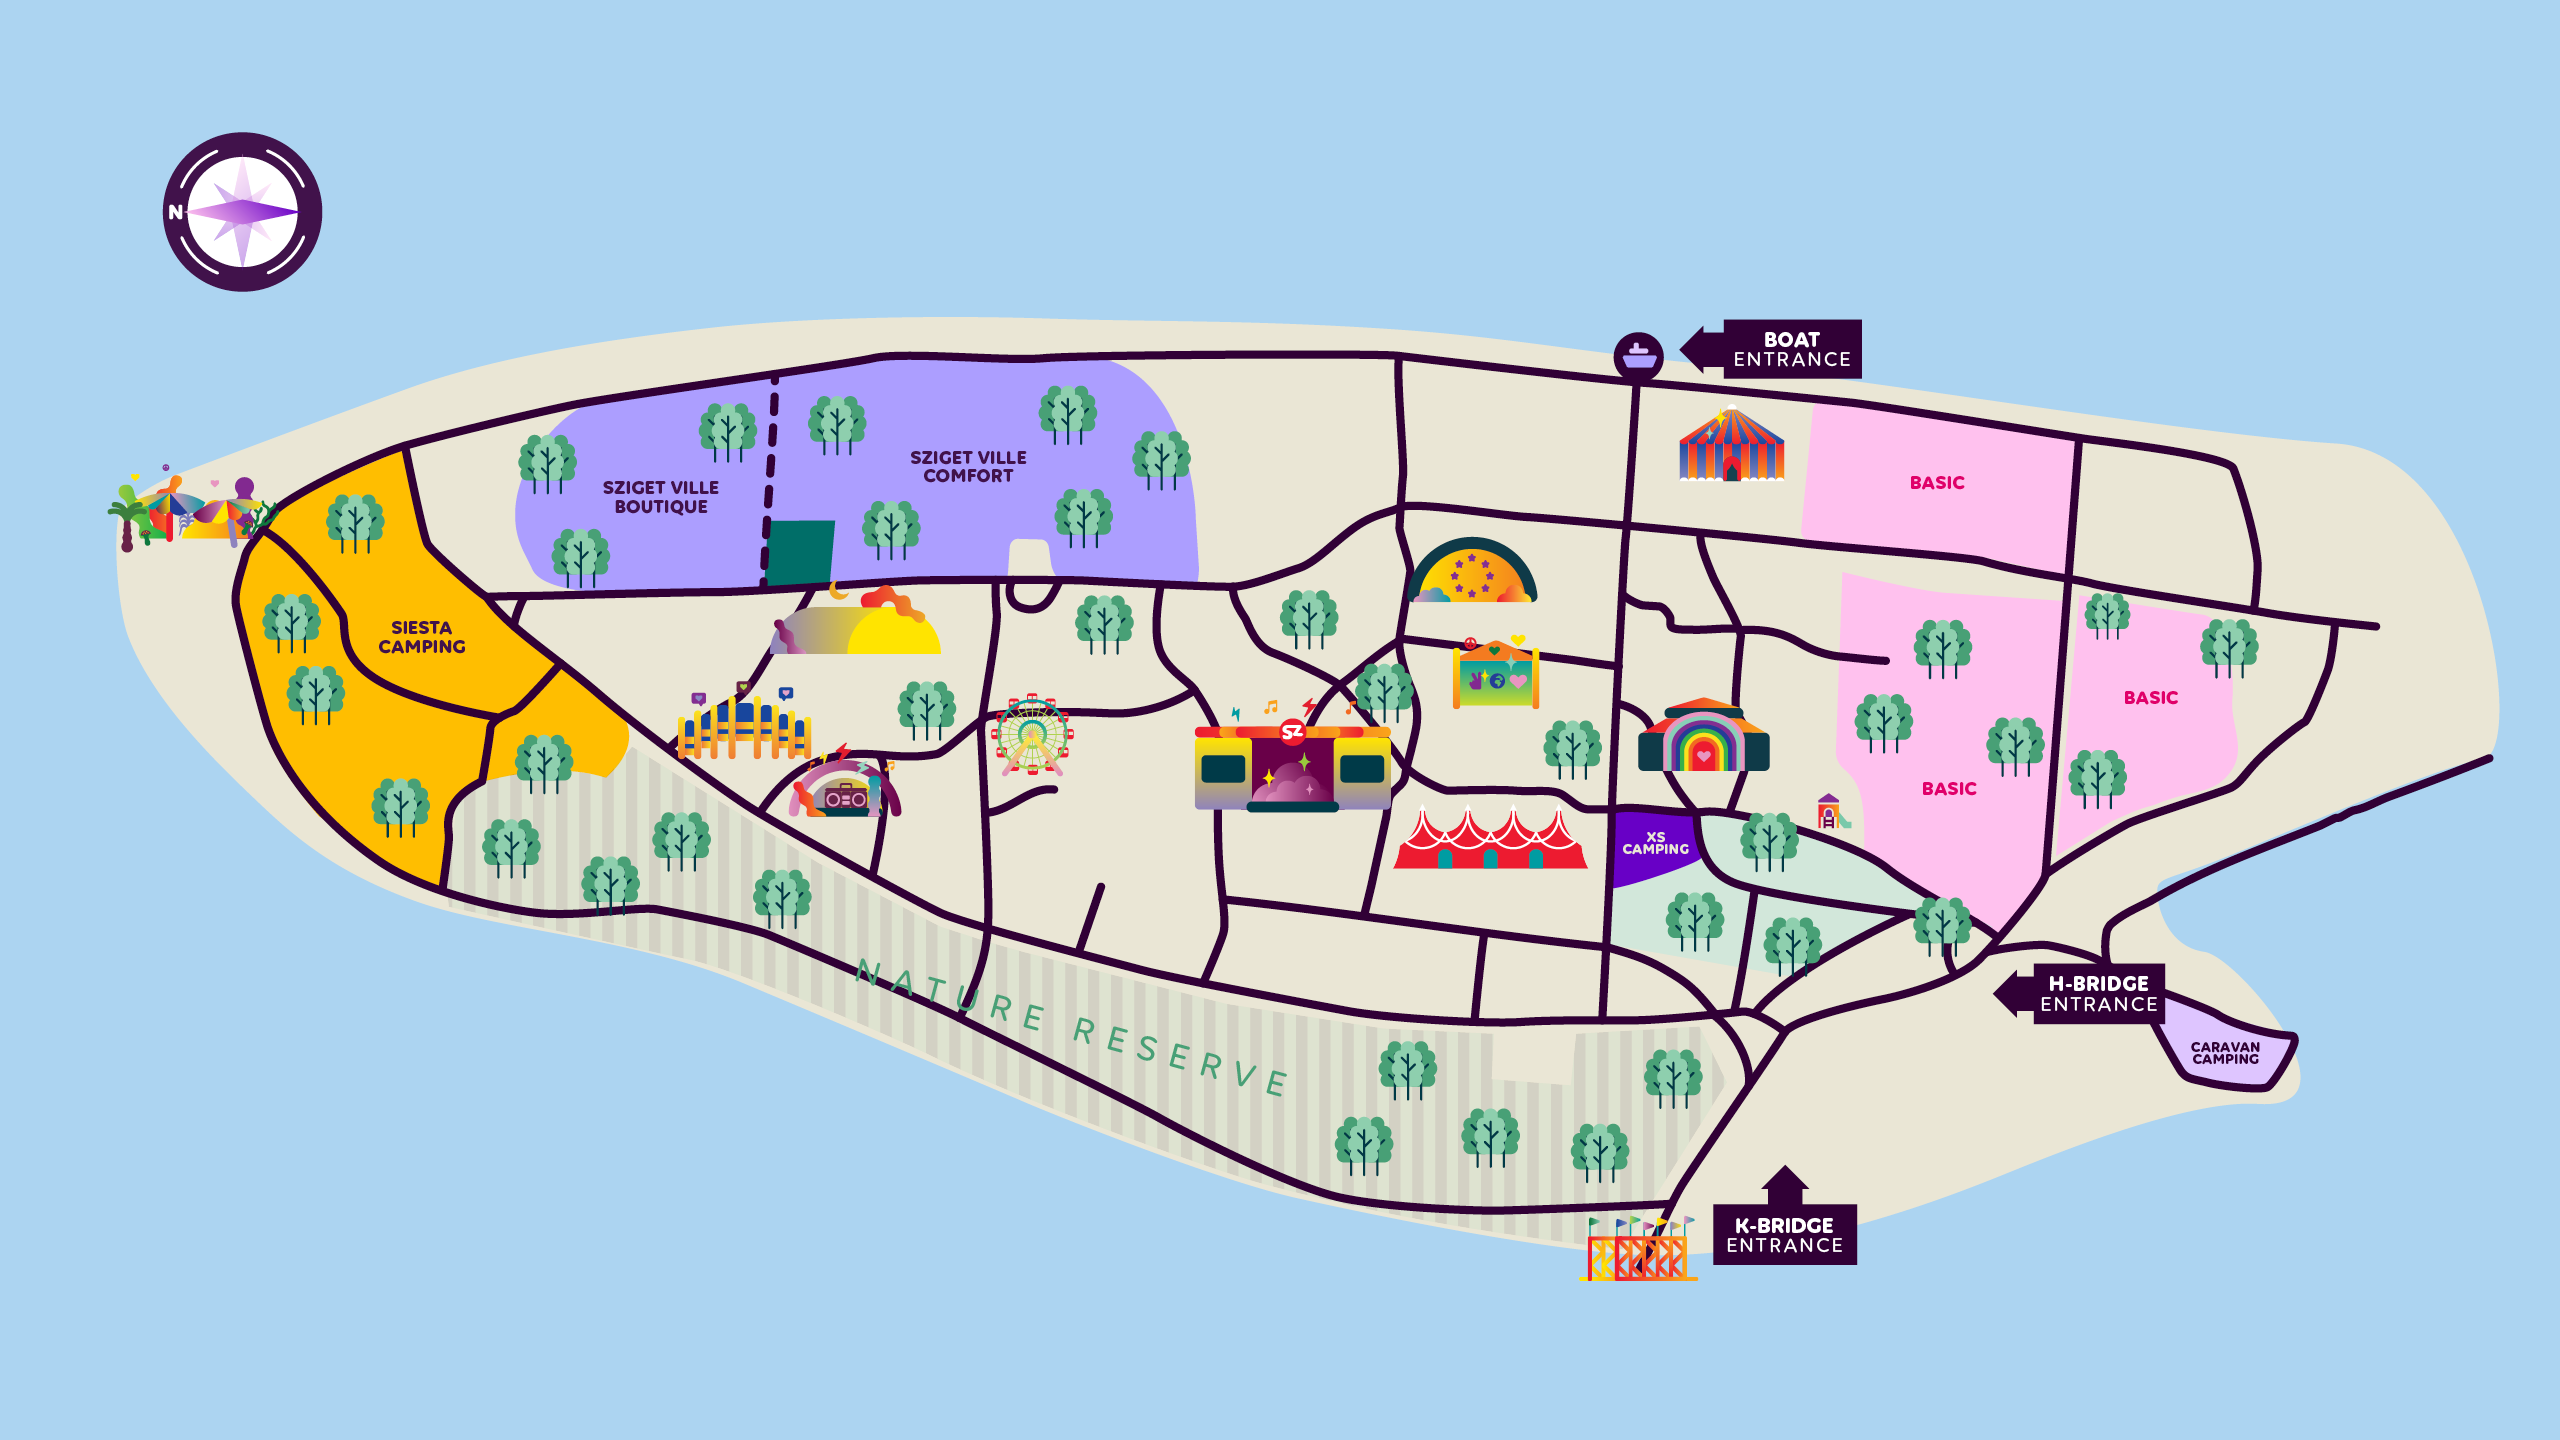 https://cdn2.szigetfestival.com/c1y5fvw/f851/fr/media/2022/11/2023map_camping_plus.png